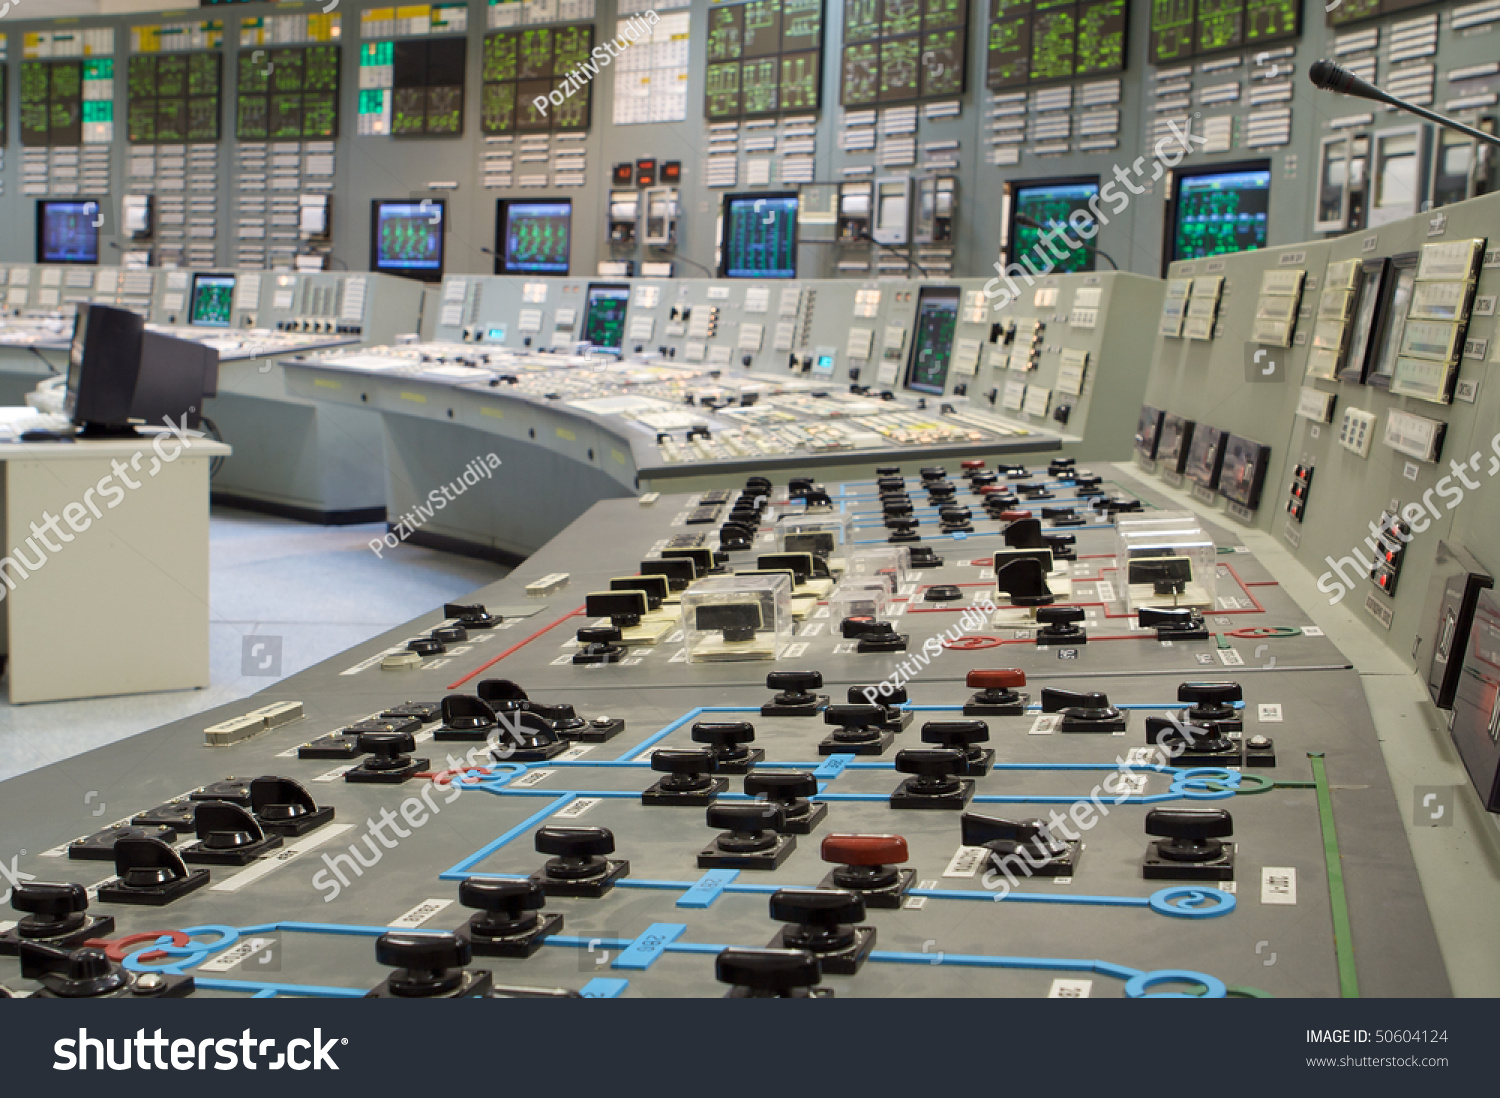 Control room of a russian nuclear power generation plant #50604124